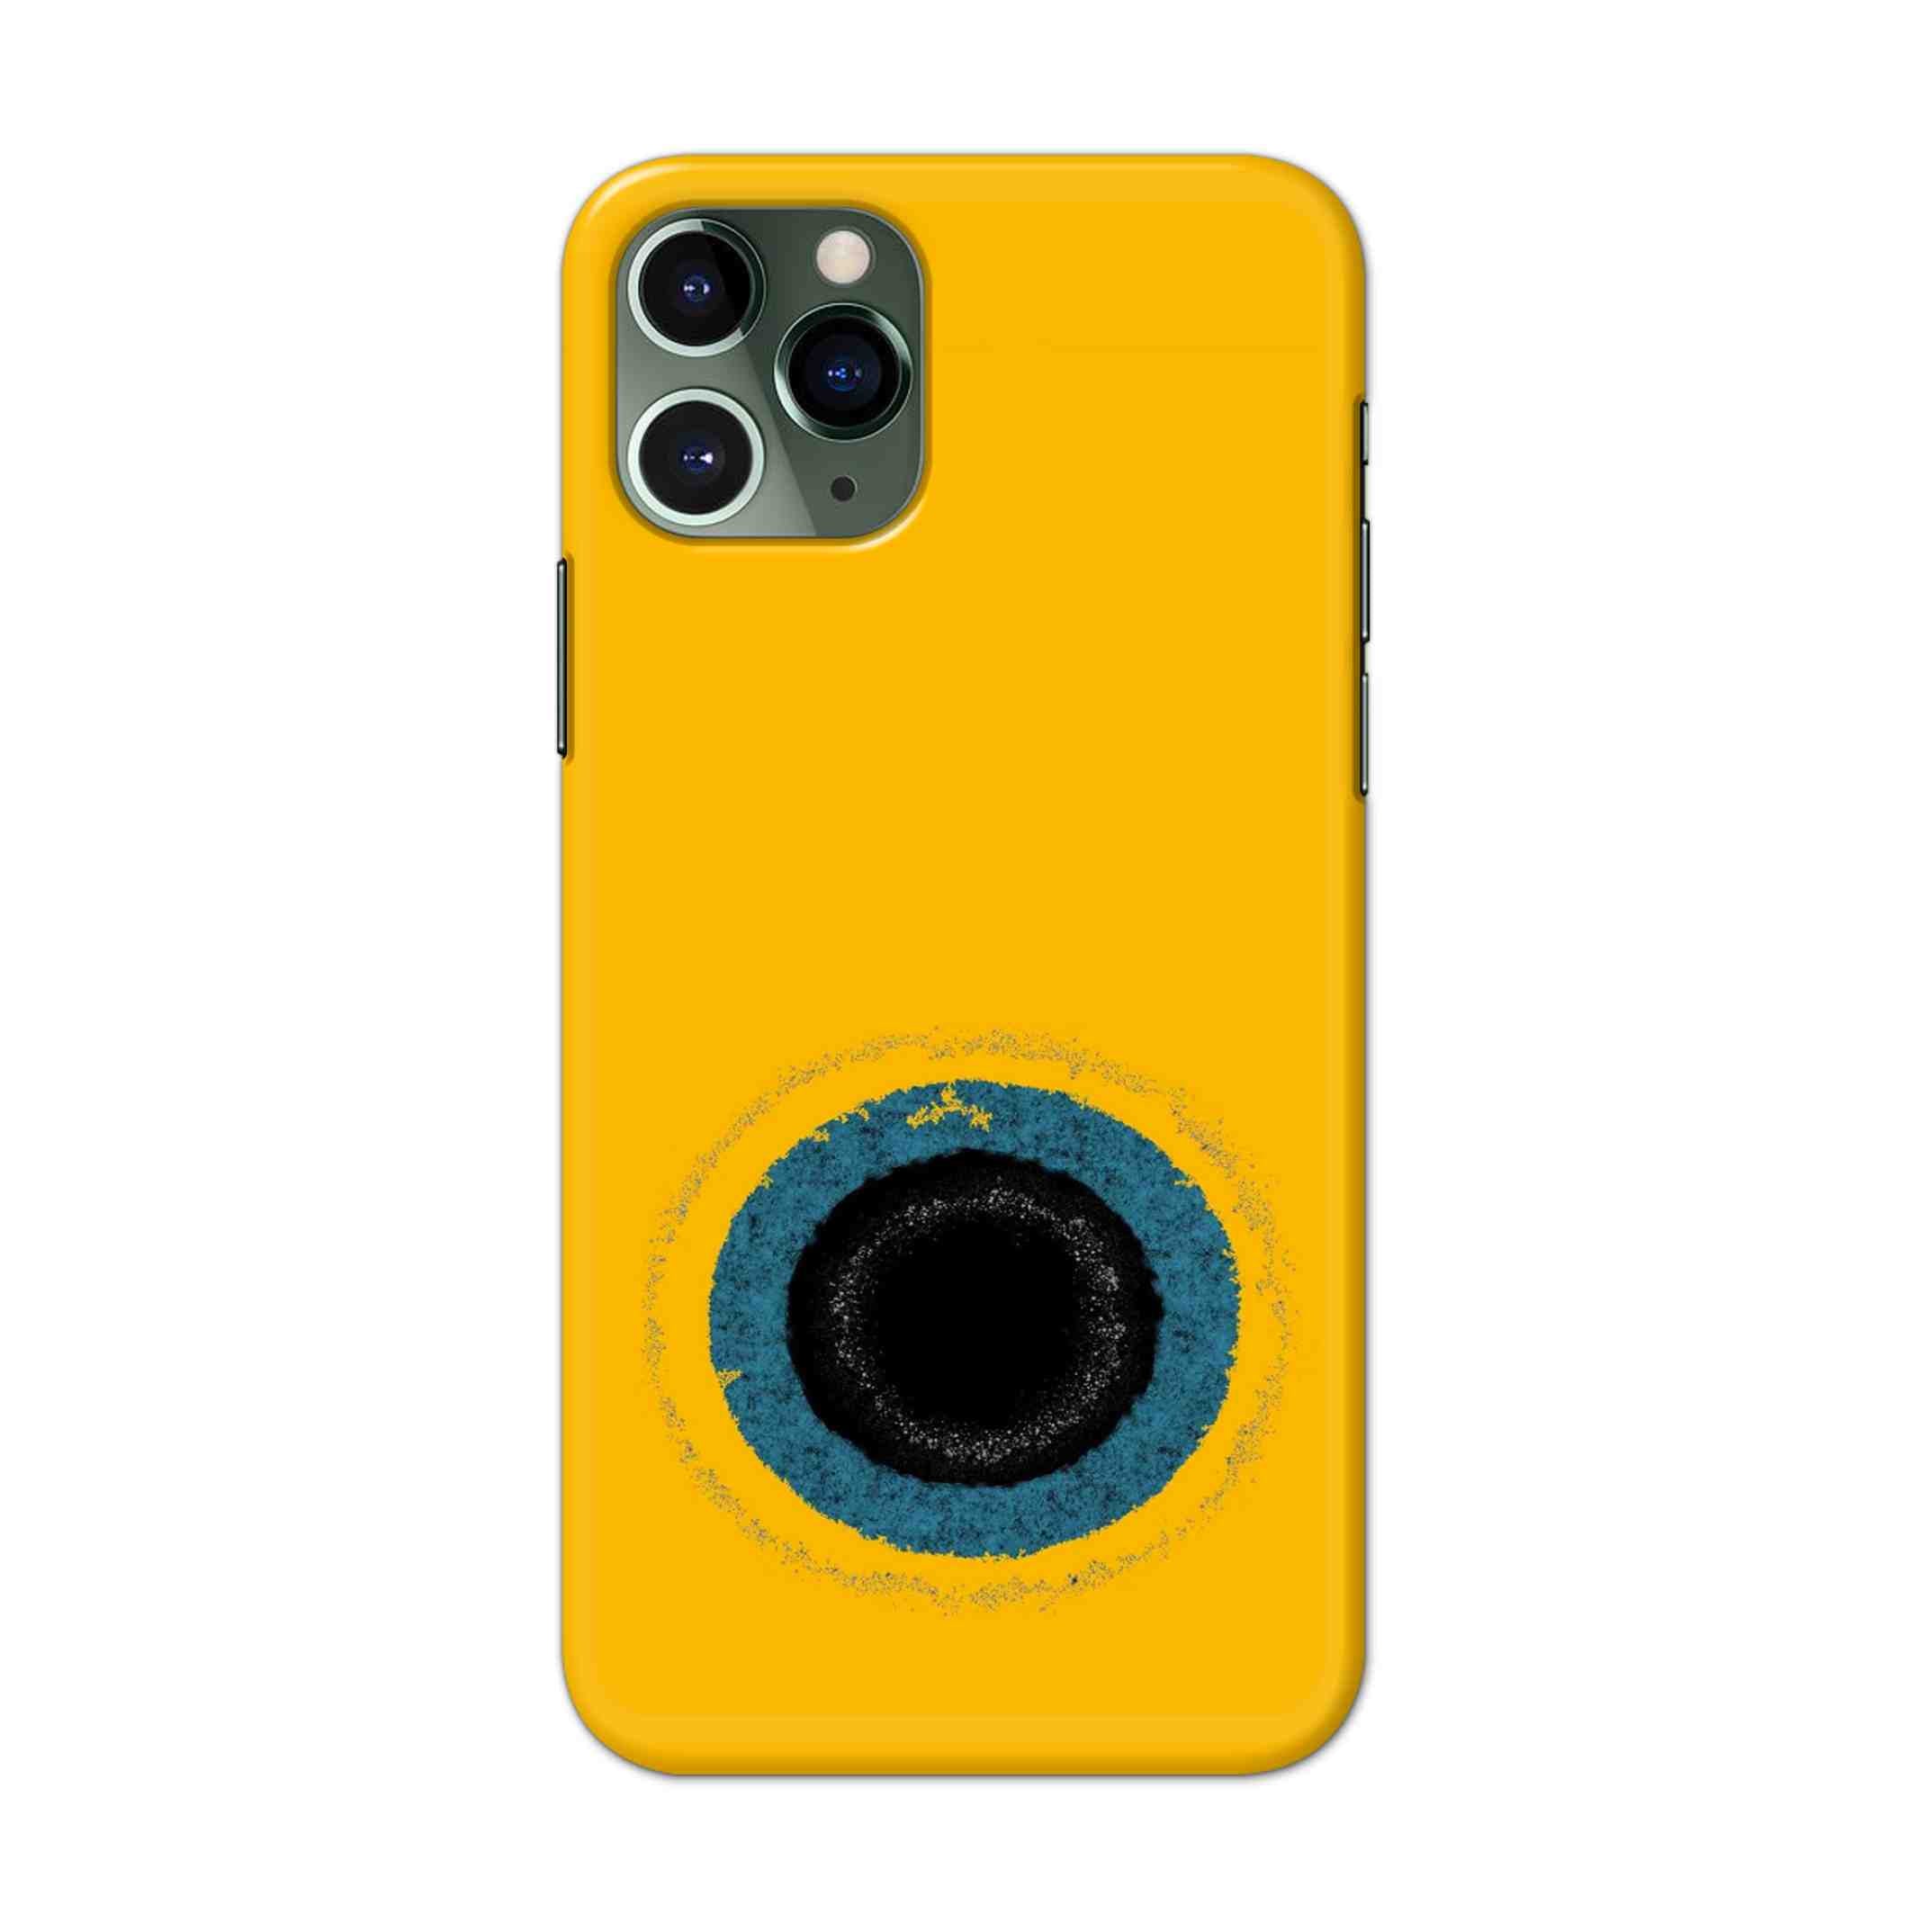 Buy Dark Hole With Yellow Background Hard Back Mobile Phone Case/Cover For iPhone 11 Pro Online